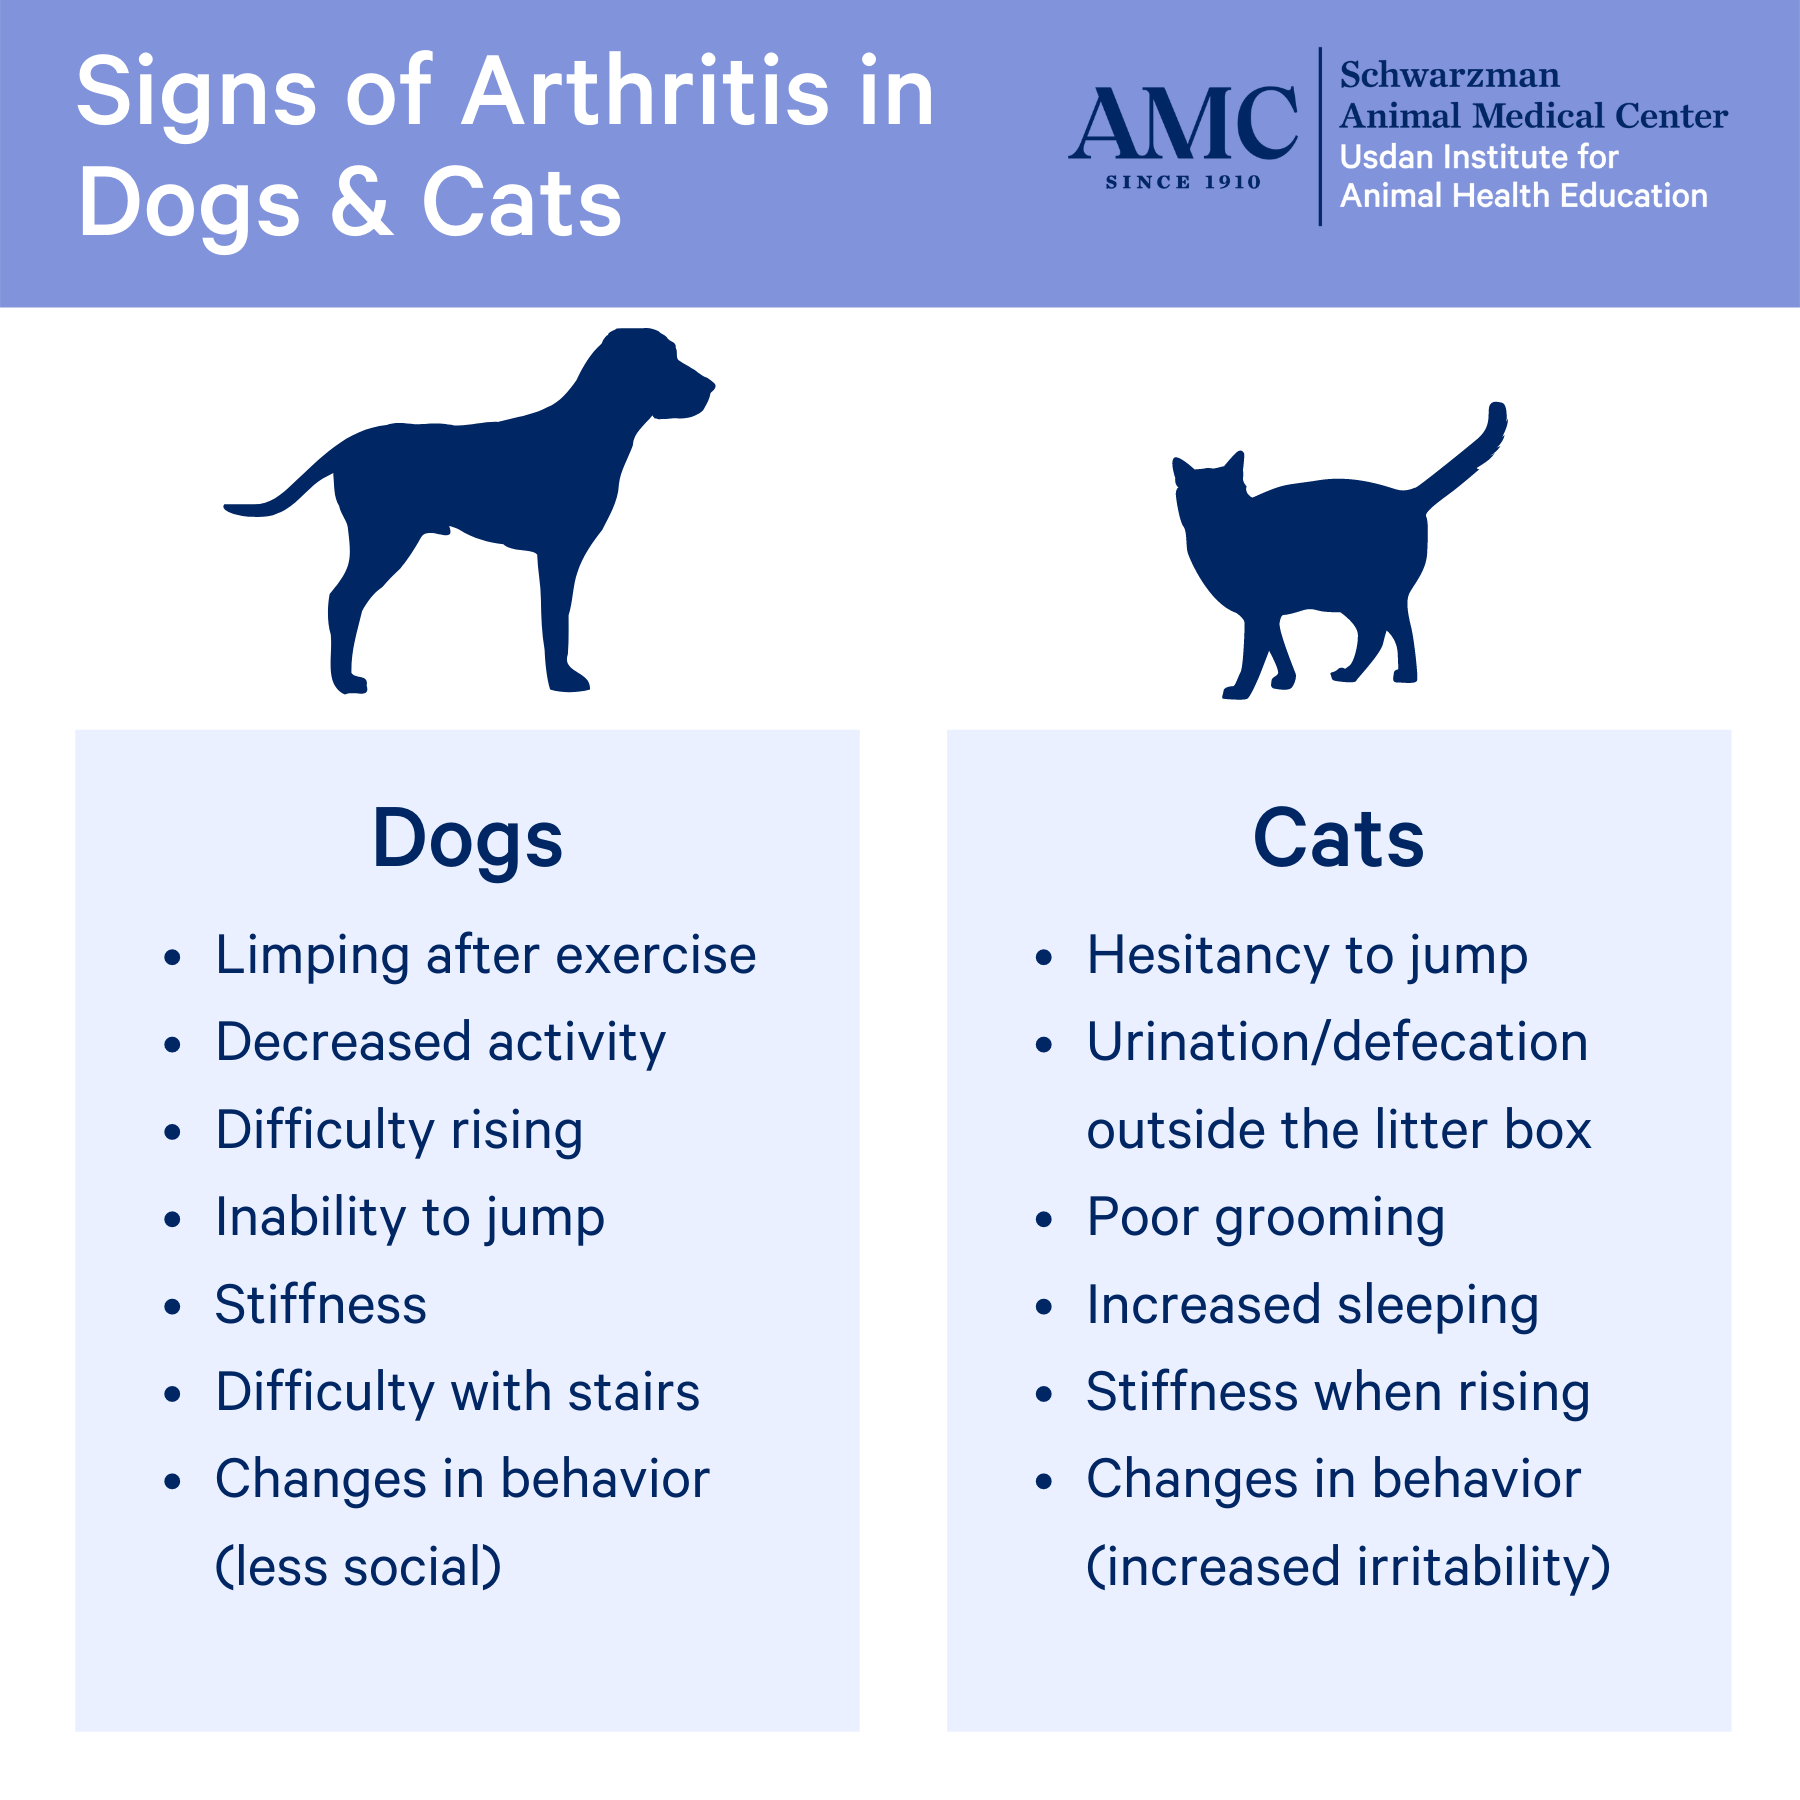 Image displays the signs of arthritis in dogs and cats. Dogs Limping after exercise, decreased activity, difficulty rising, inability to jump, stiffness, difficulty with stairs, changes in behavior (less social). 

Cats hesitancy to jump, urination/defecation outside the litterbox, poor grooming, increased sleeping, stiffness when rising, changes in behavior (increased irritability).